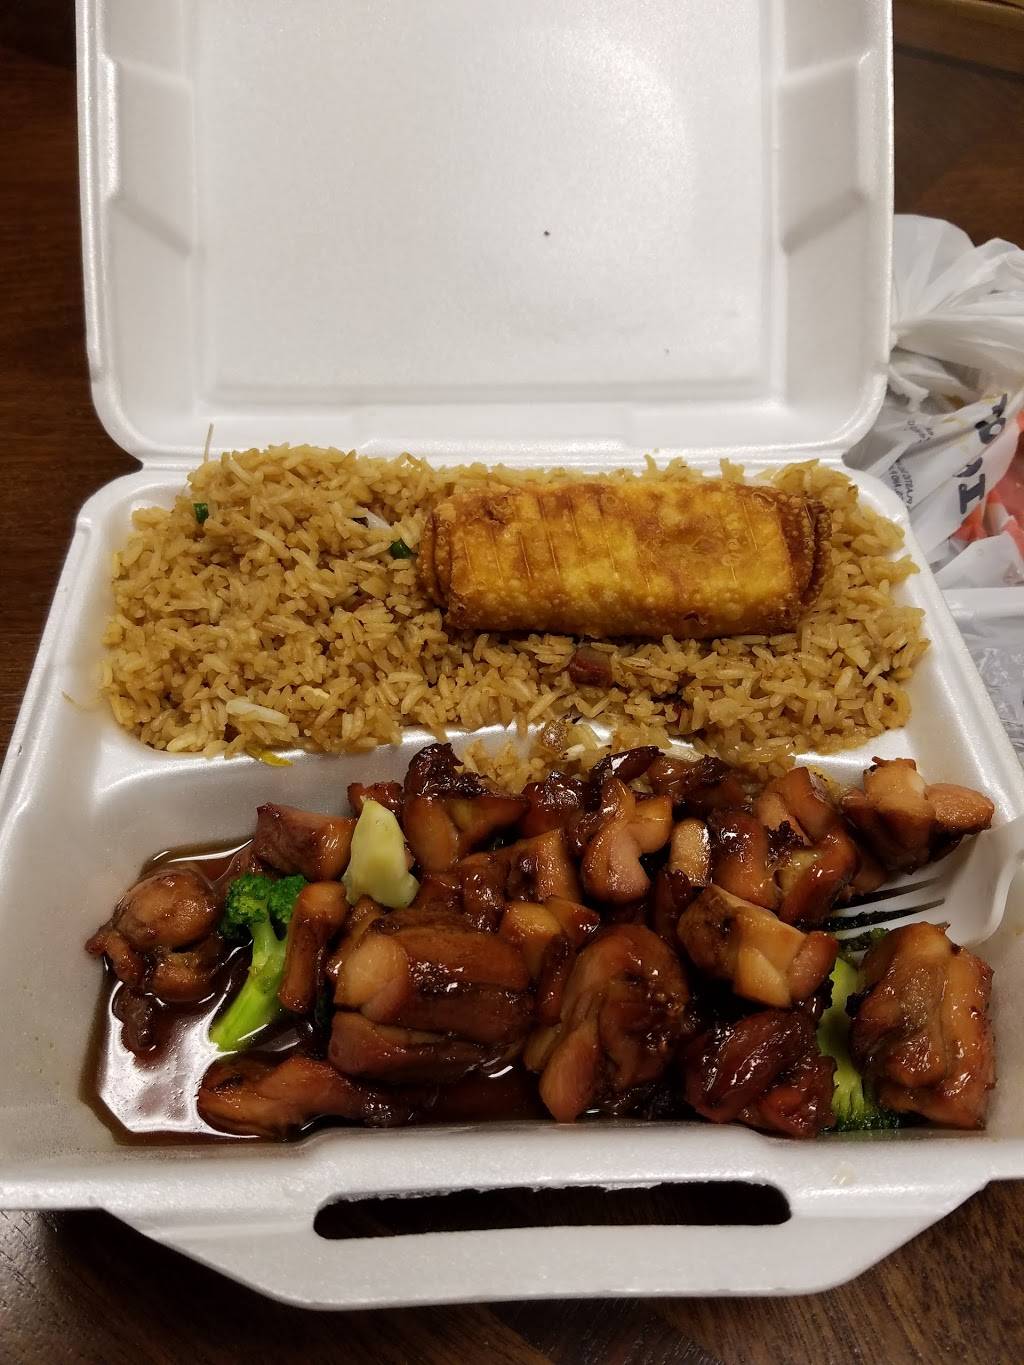 Golden Crown Chinese Restaurant | restaurant | 1624 Mentor Ave, Painesville, OH 44077, USA | 4403524404 OR +1 440-352-4404